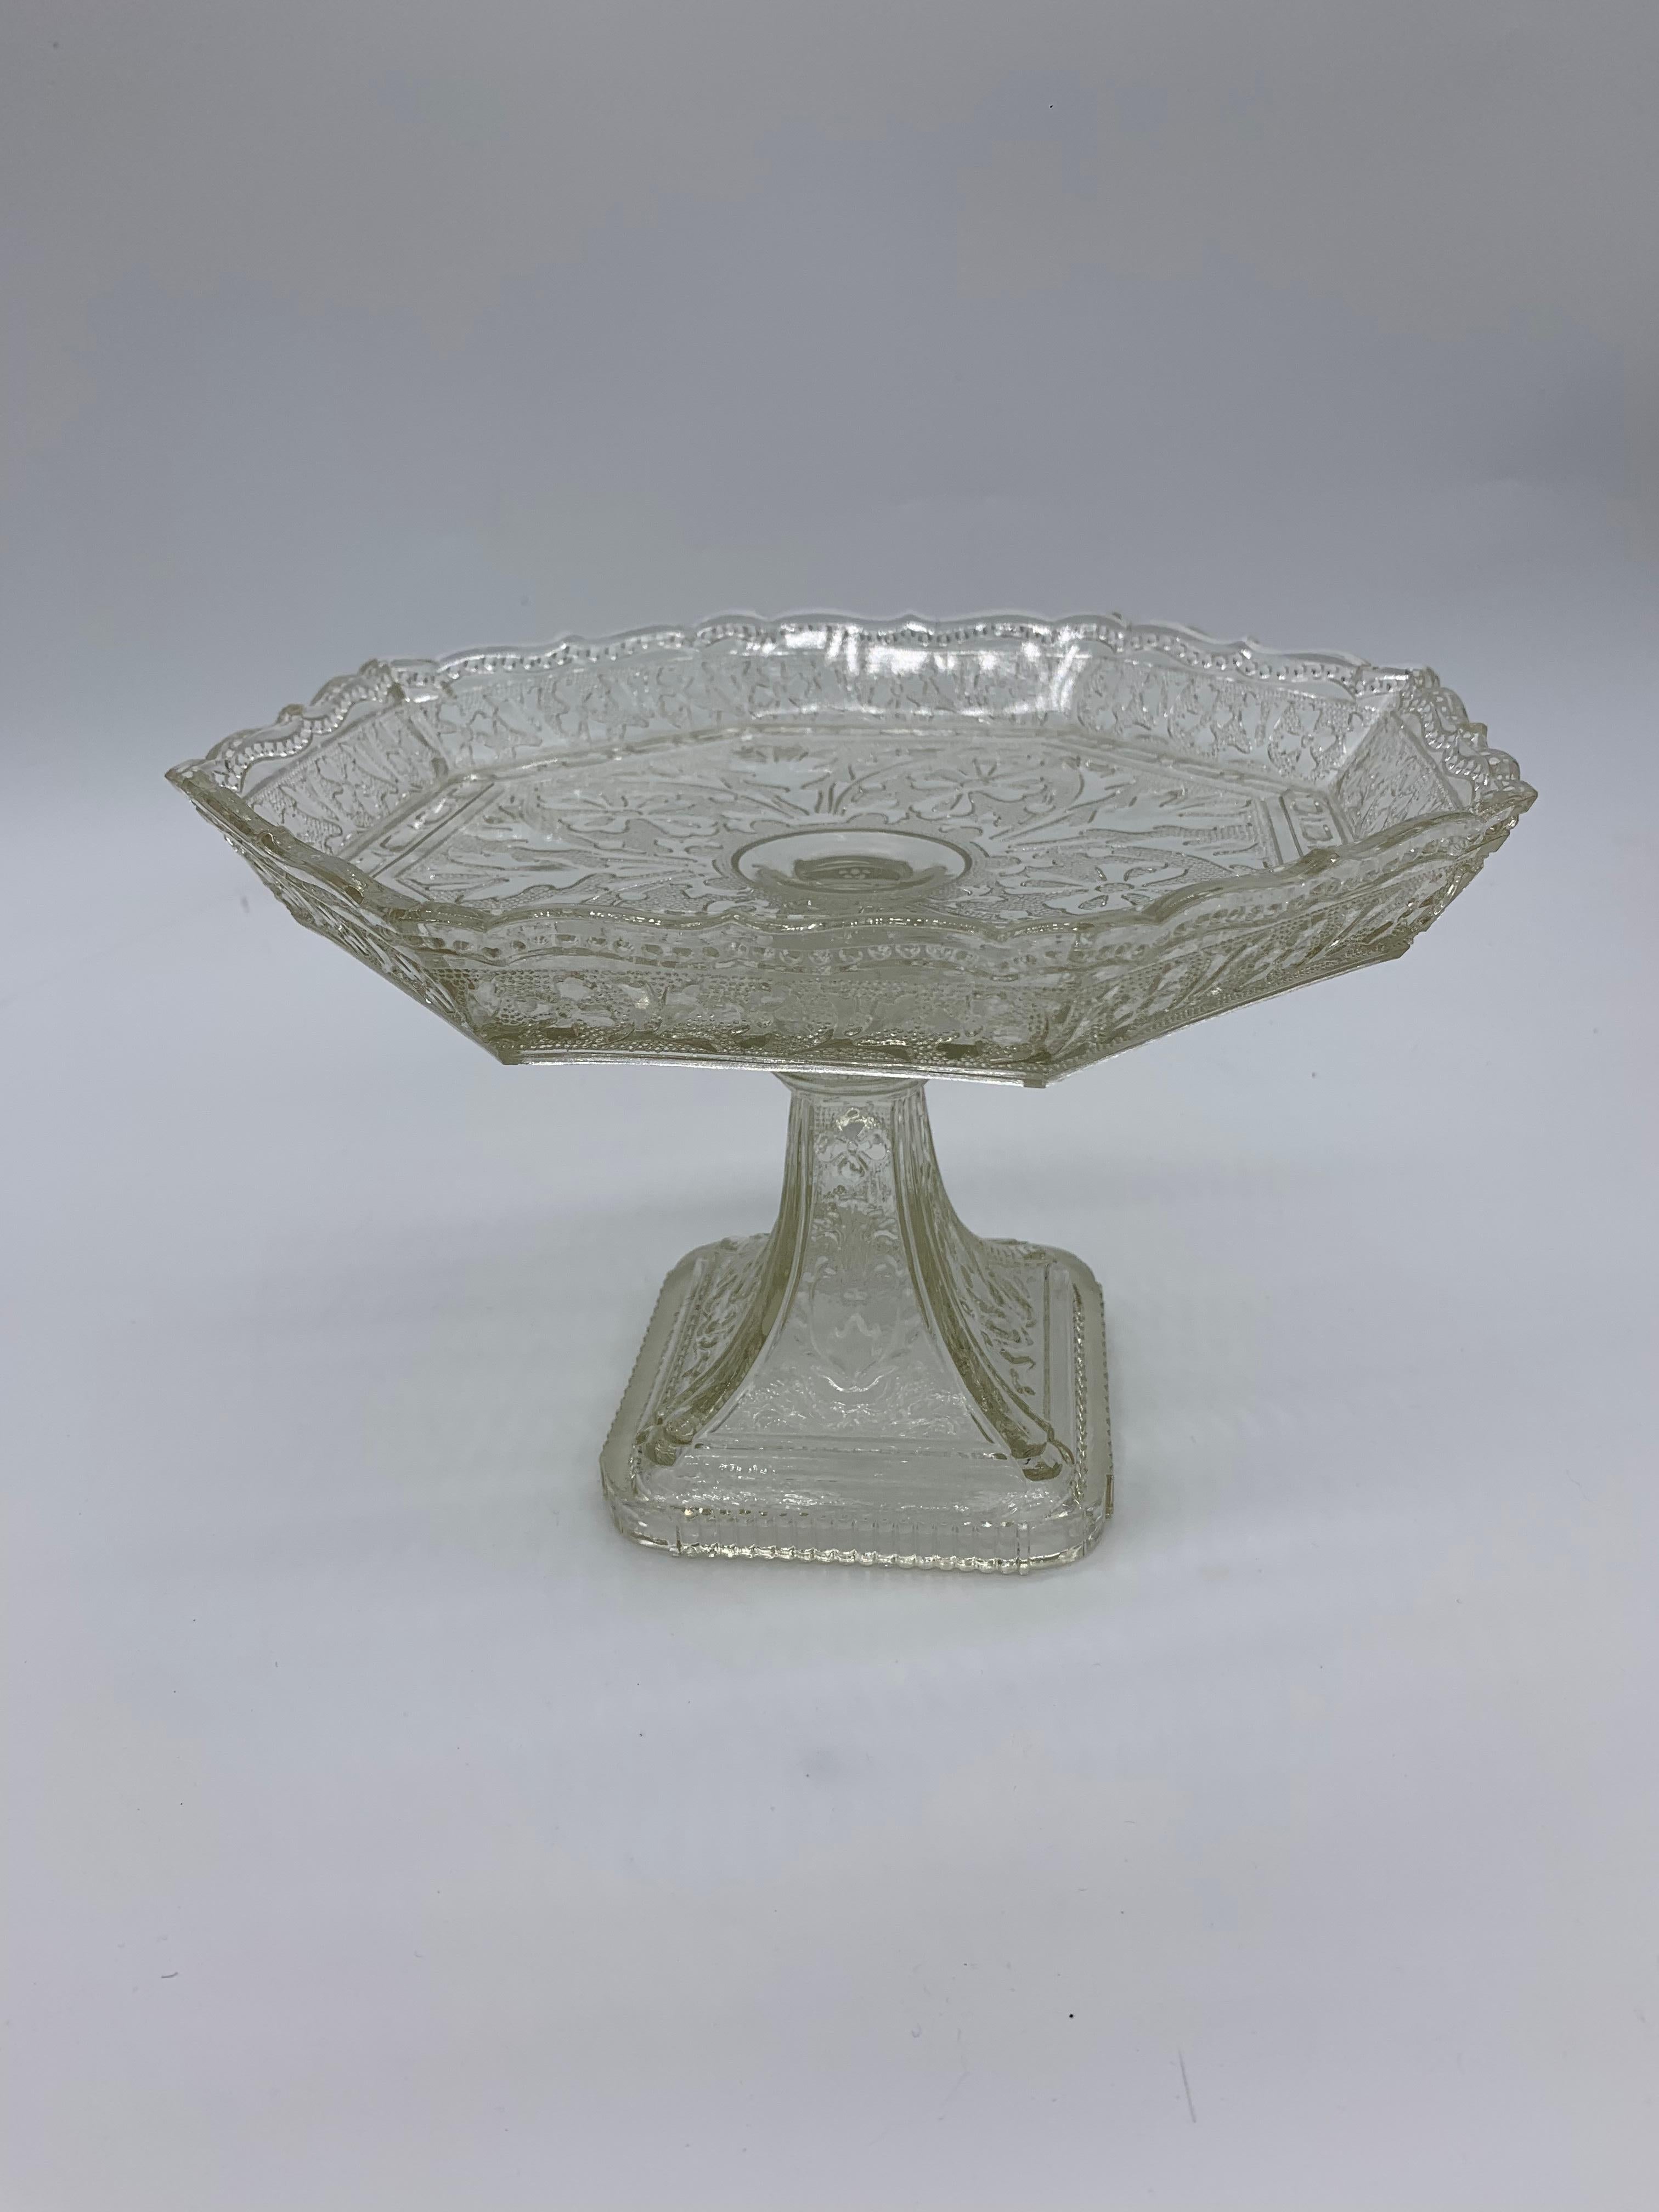 Beautiful off-white cookie bowl or presentation bowl.
It’s a 1930 Art Deco Serveware and makes for a stunning center piece. It’s in octagonal shape and has a beautiful floral pattern.